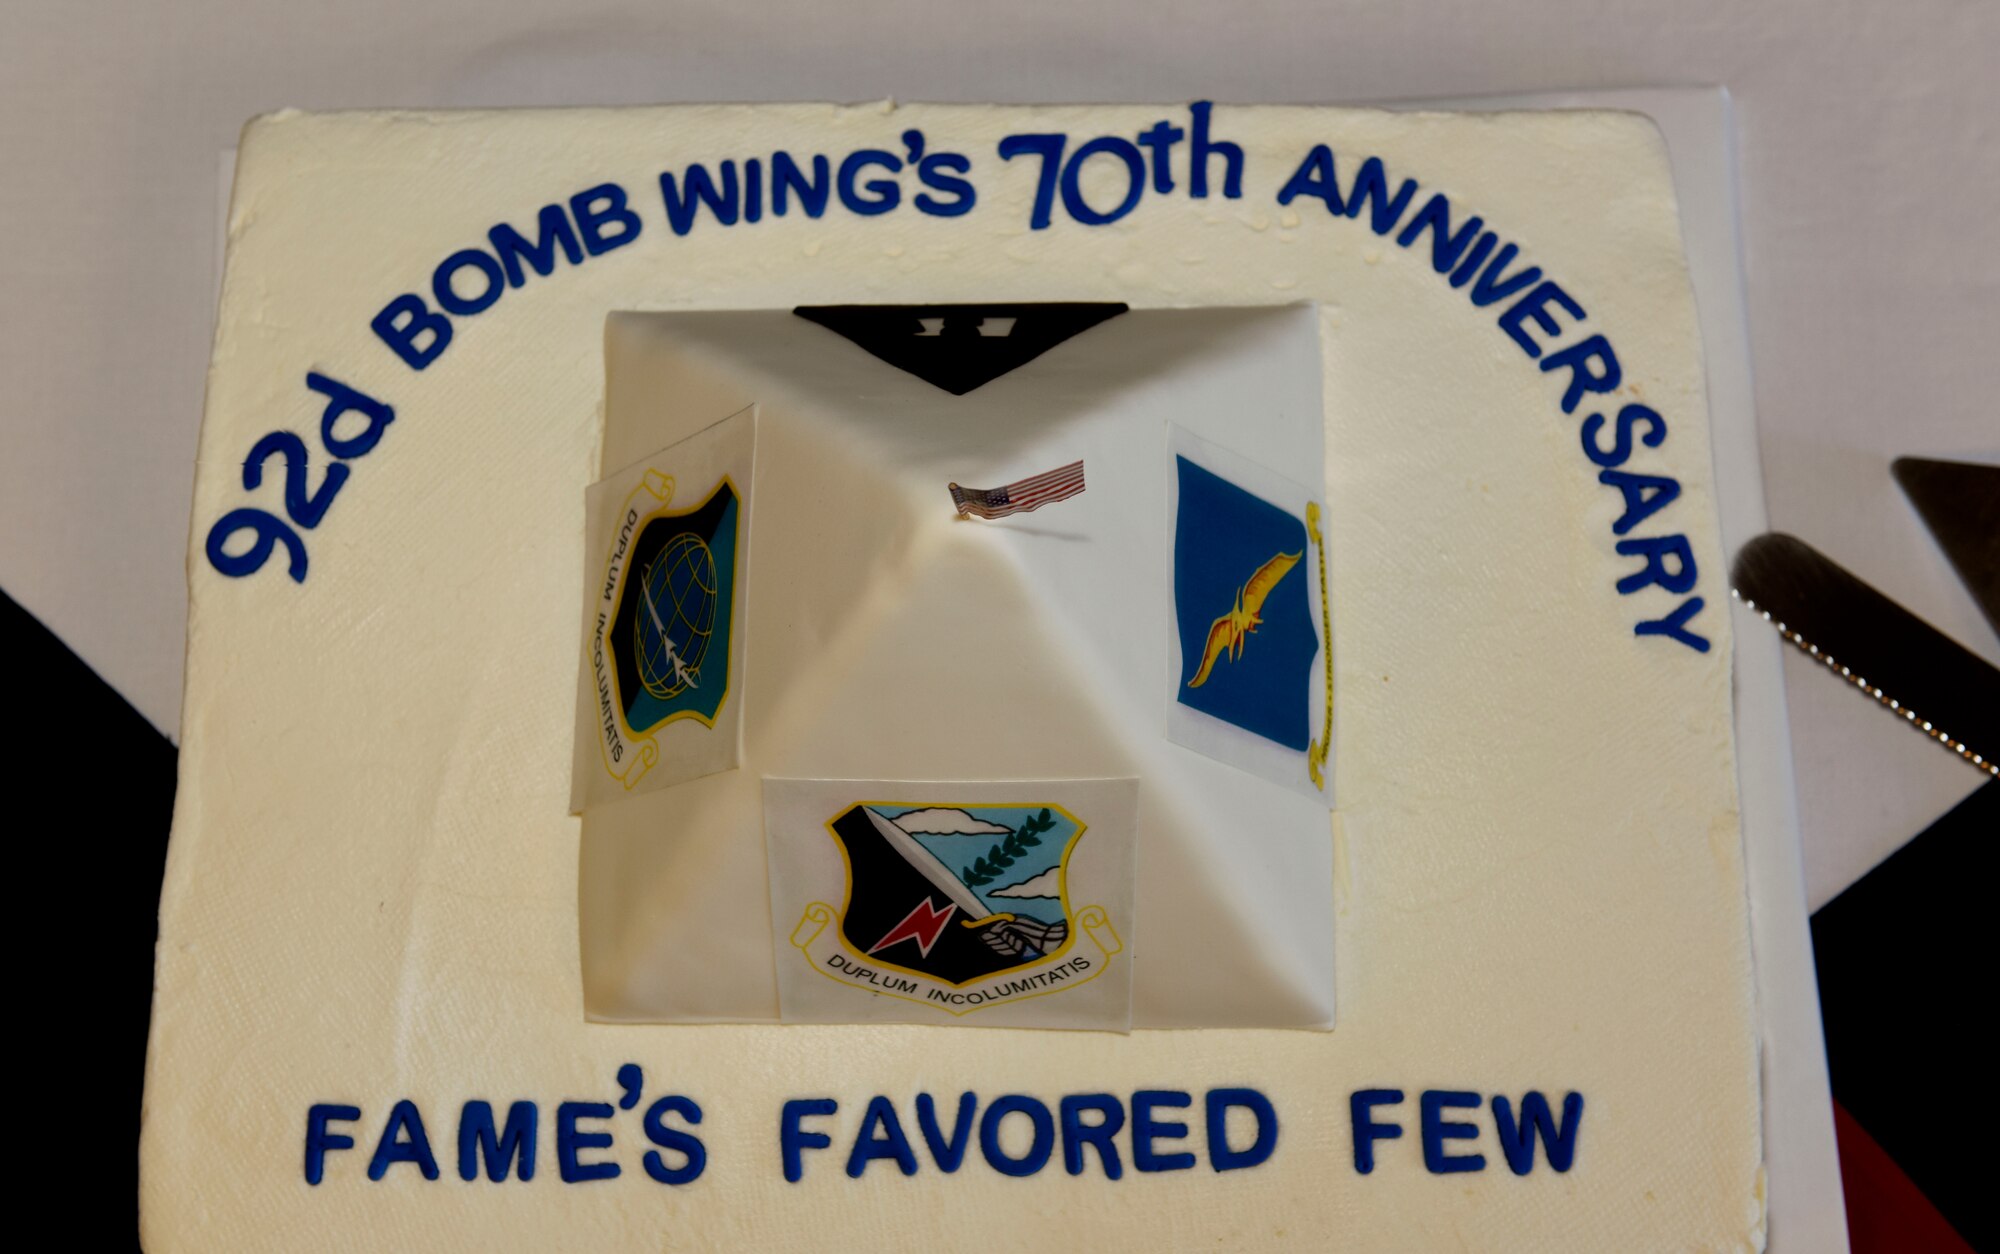 The Warrior Dining Facility hosts a cutting of the cake to commemorate the 92nd Air Refueling Wing’s 70th anniversary at Fairchild Air Force Base, Wash., Nov.17, 2017. Then the 1990s marked the beginning of a significant change in the Fairchild mission. The B-52 wing transferred to another base, the first step in Fairchild’s transition to an air refueling wing, ending the bomber mission of the wing after 47 years of duty. (U.S. Air Force photo/Airman 1st Class Jesenia Landaverde)